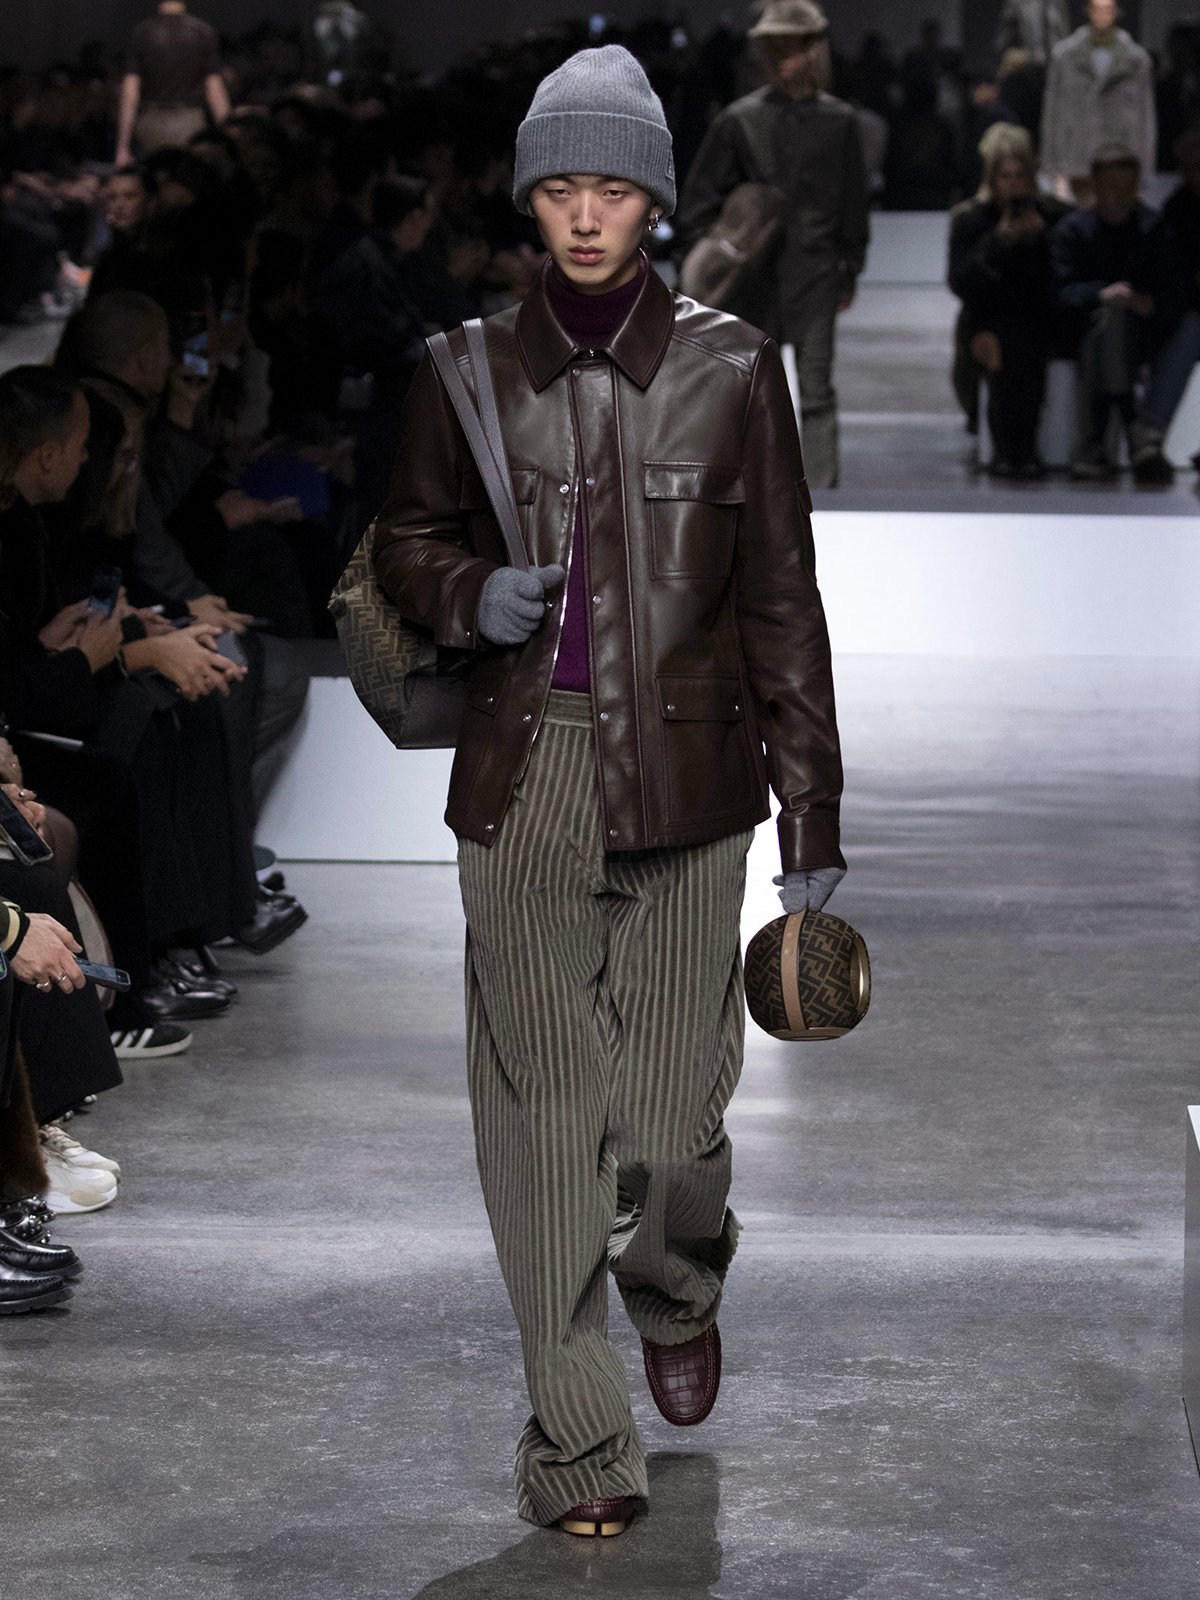 Between country and city: the double life of the Fendi man